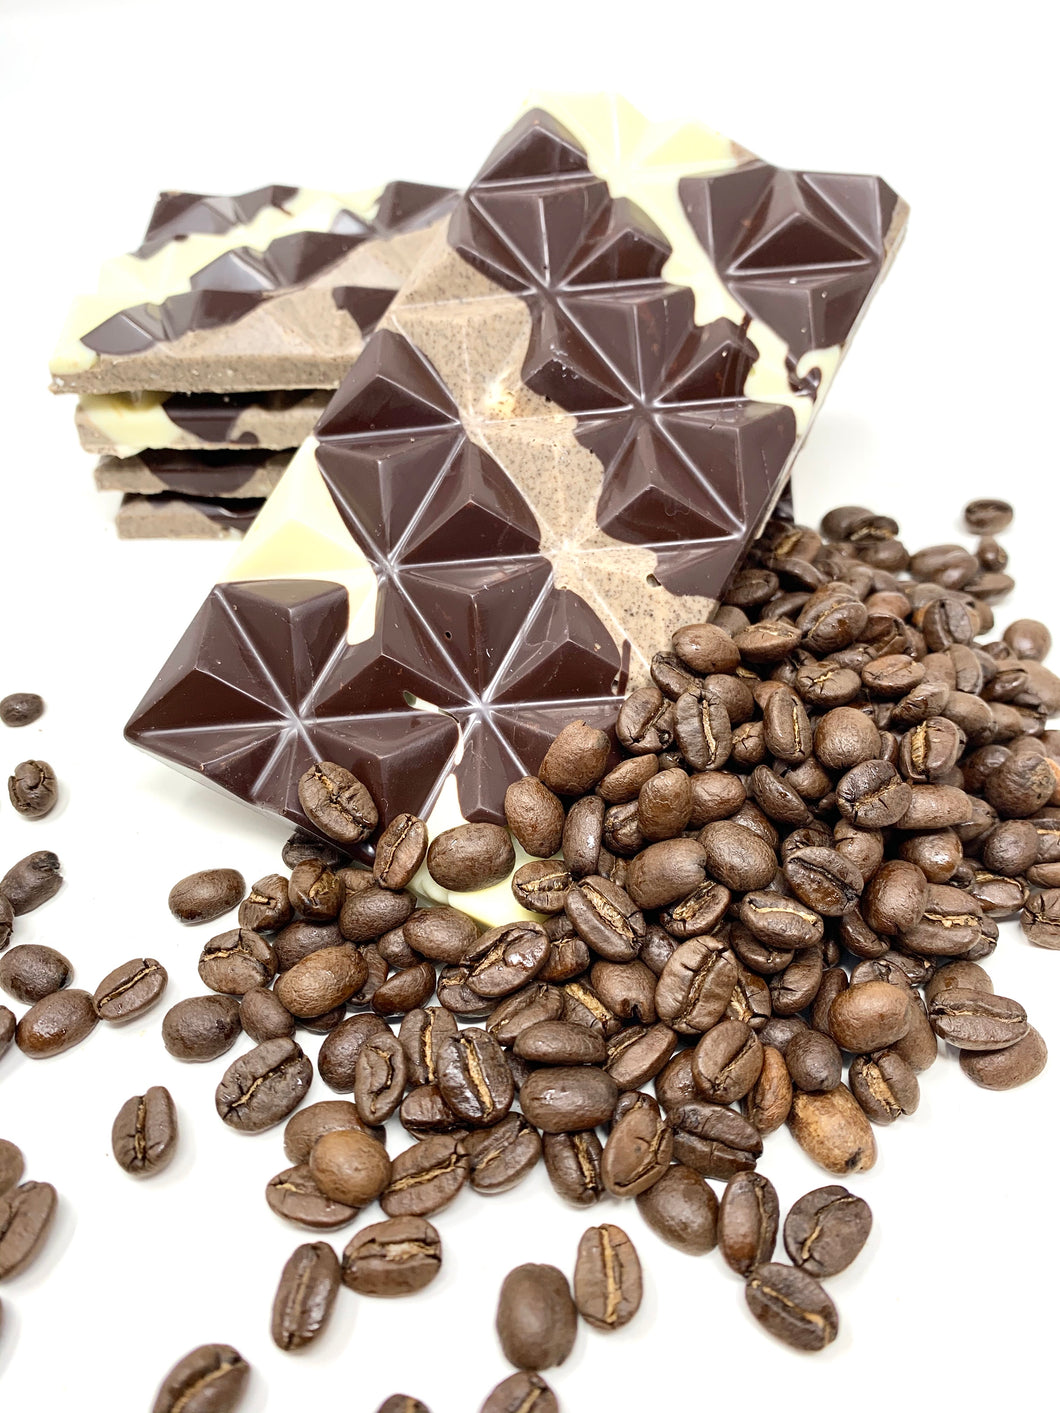 35% Cappuccino Bar - #Chocolate4Change - Cocoa40 Inc. - Best Gourmet Chocolate Gifts in Toronto! Our chocolates and confections are made by hand in Richmond Hill, Canada. Shop small and support local.